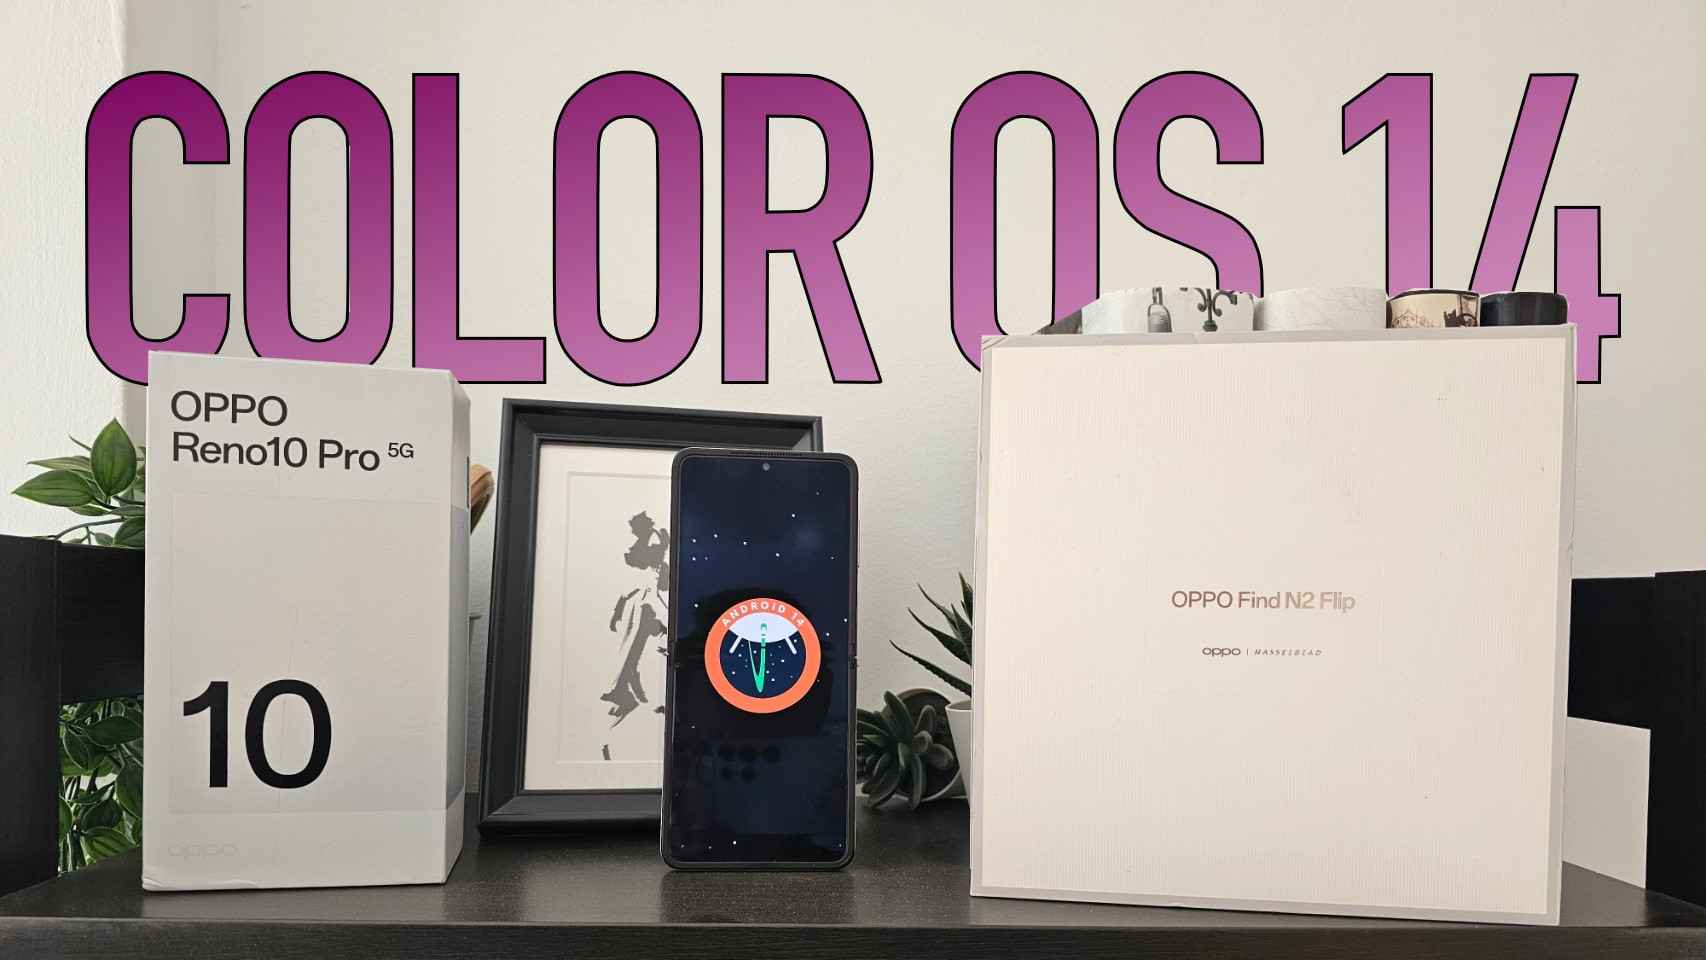 Oppo Color OS 14